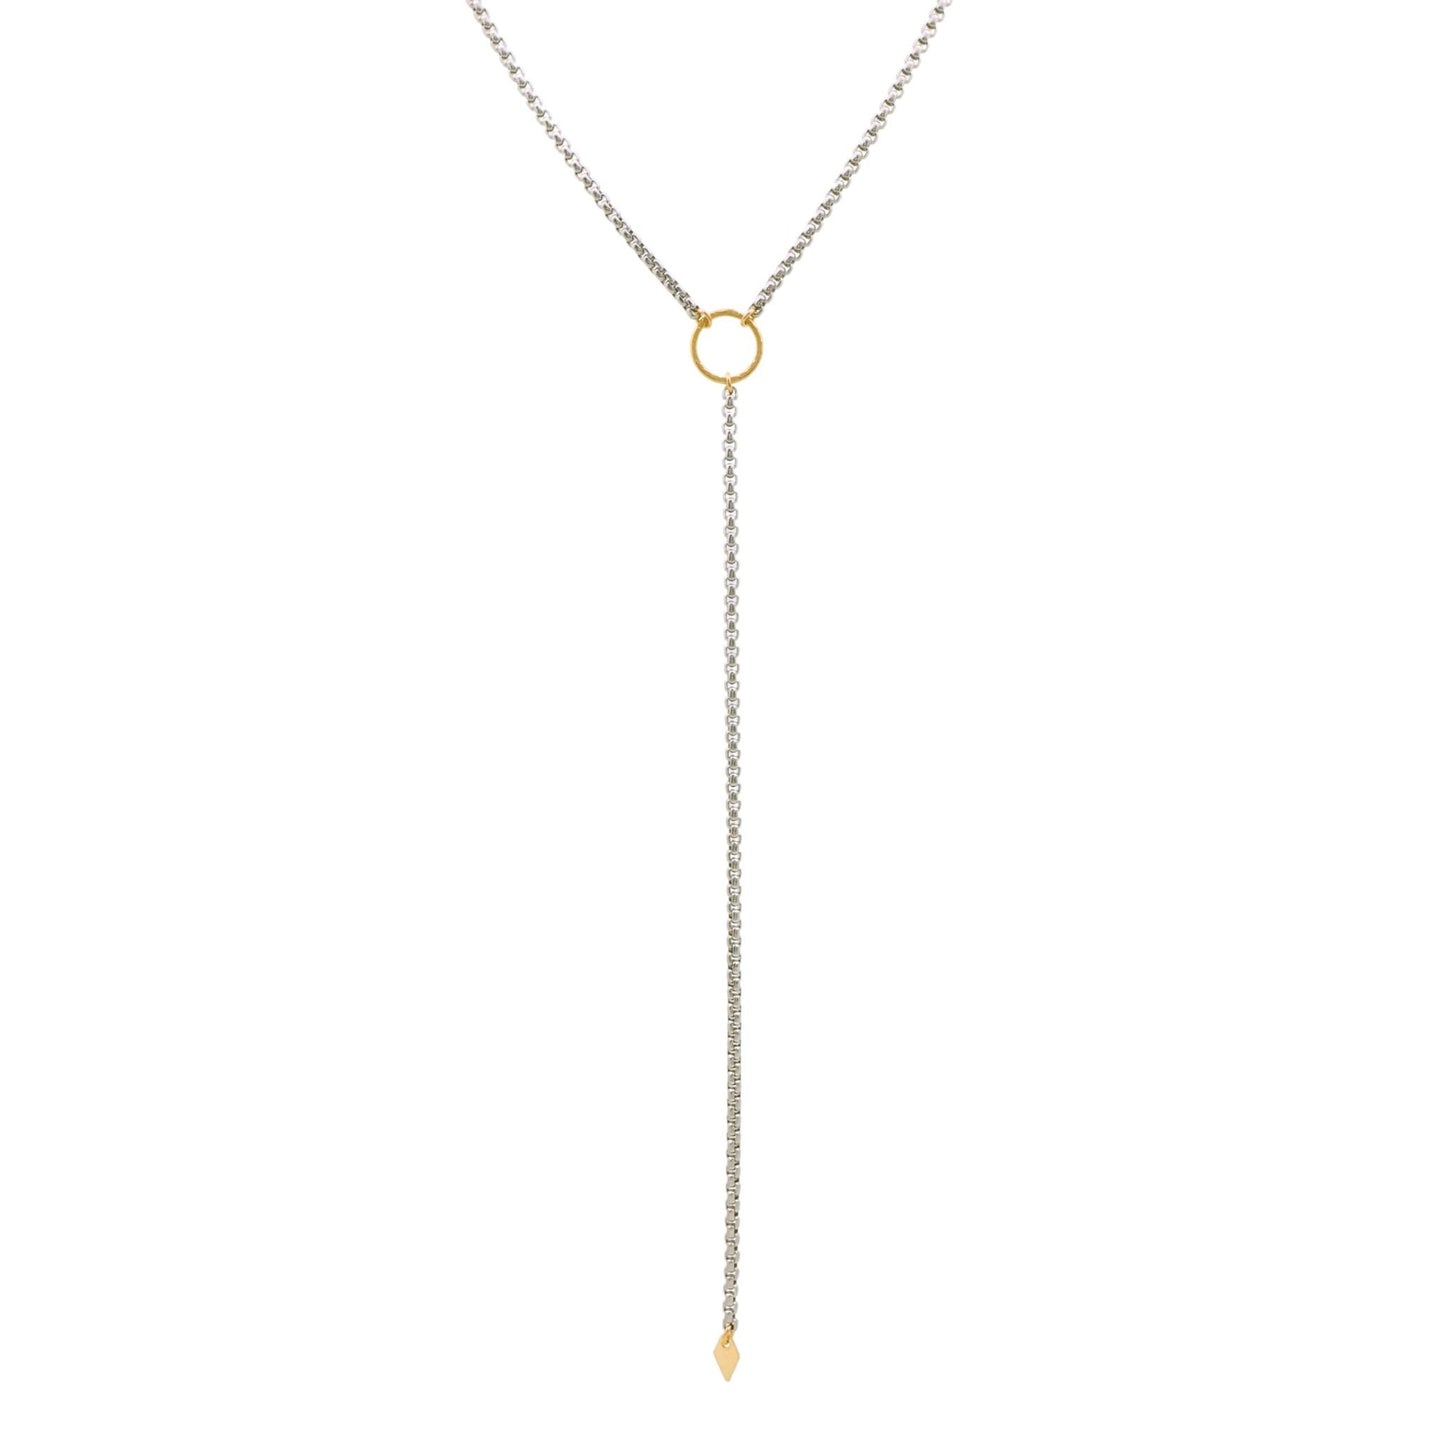 Necklace - Lariat - Mixed Metals Stainless Steel and Gold-filled - 1